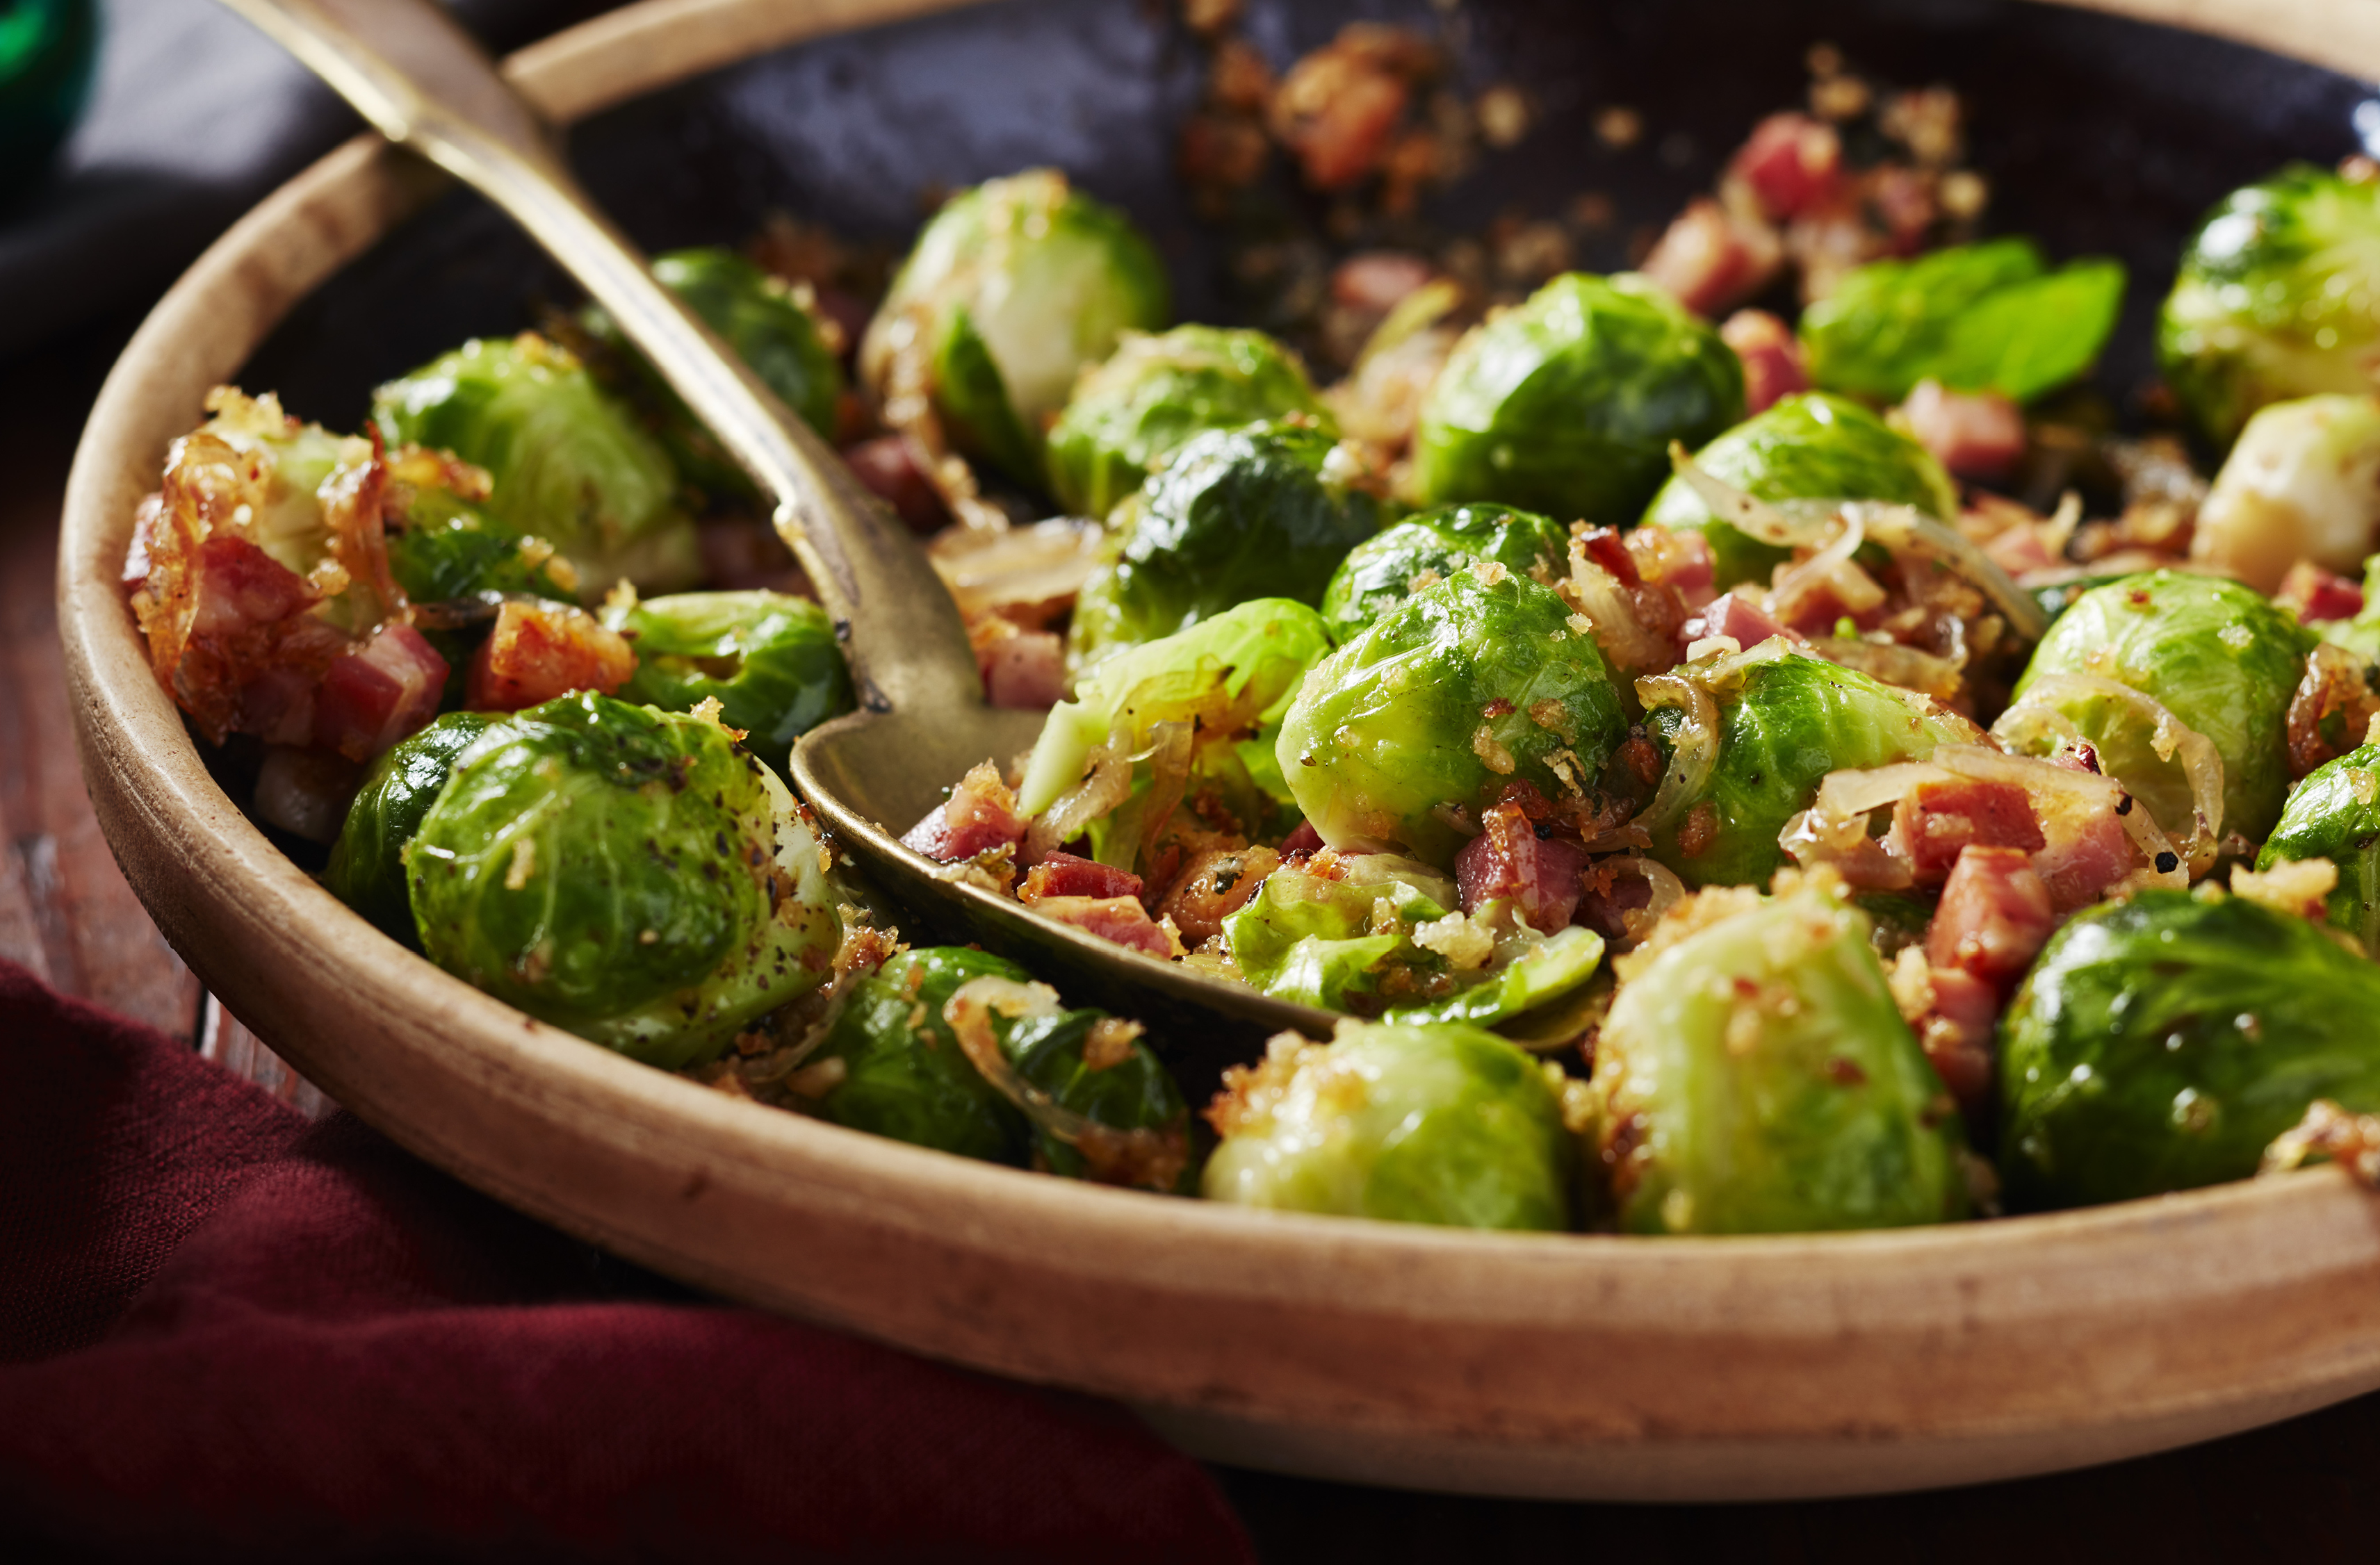 A bowl cradles a spoon and seasoned Brussels sprouts with diced pancetta
